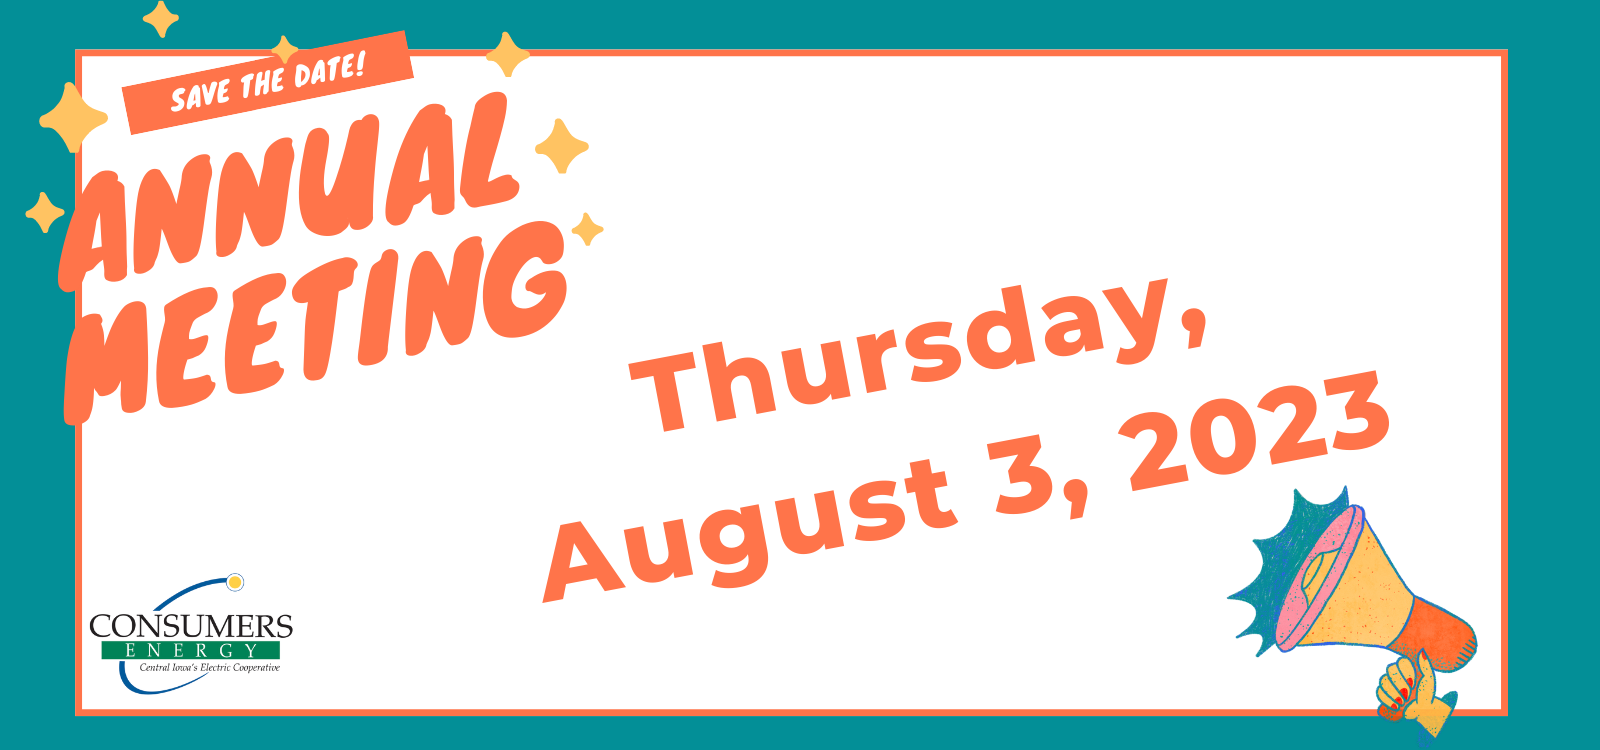 Save the date! Annual Meeting Thursday, August 3, 2023